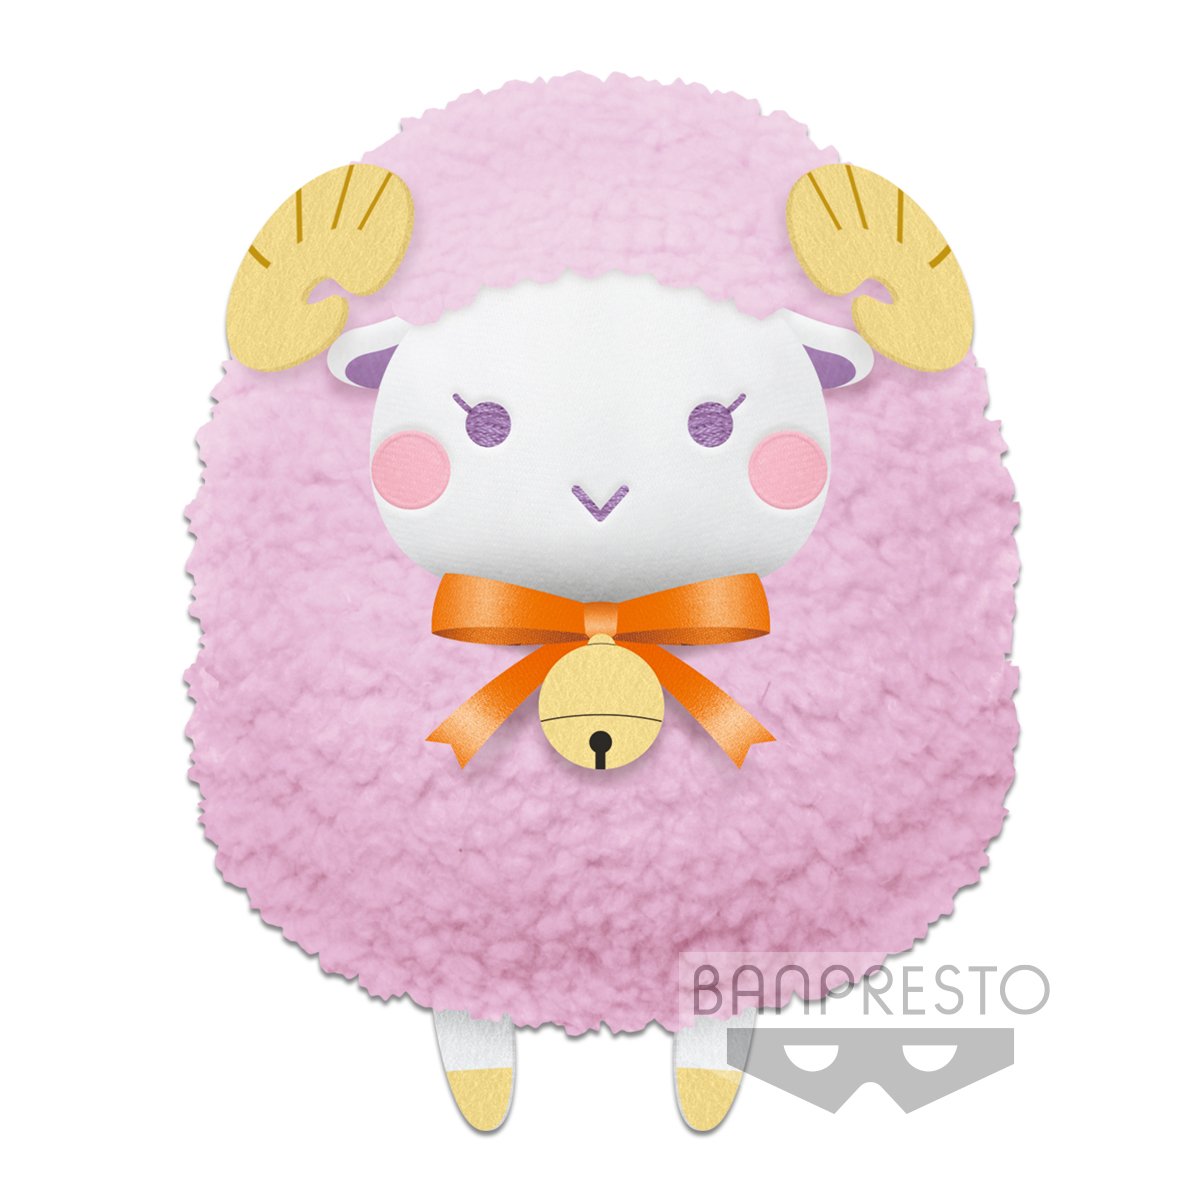 Obey Me! - Leviathan Sheep Plush 8" image count 0